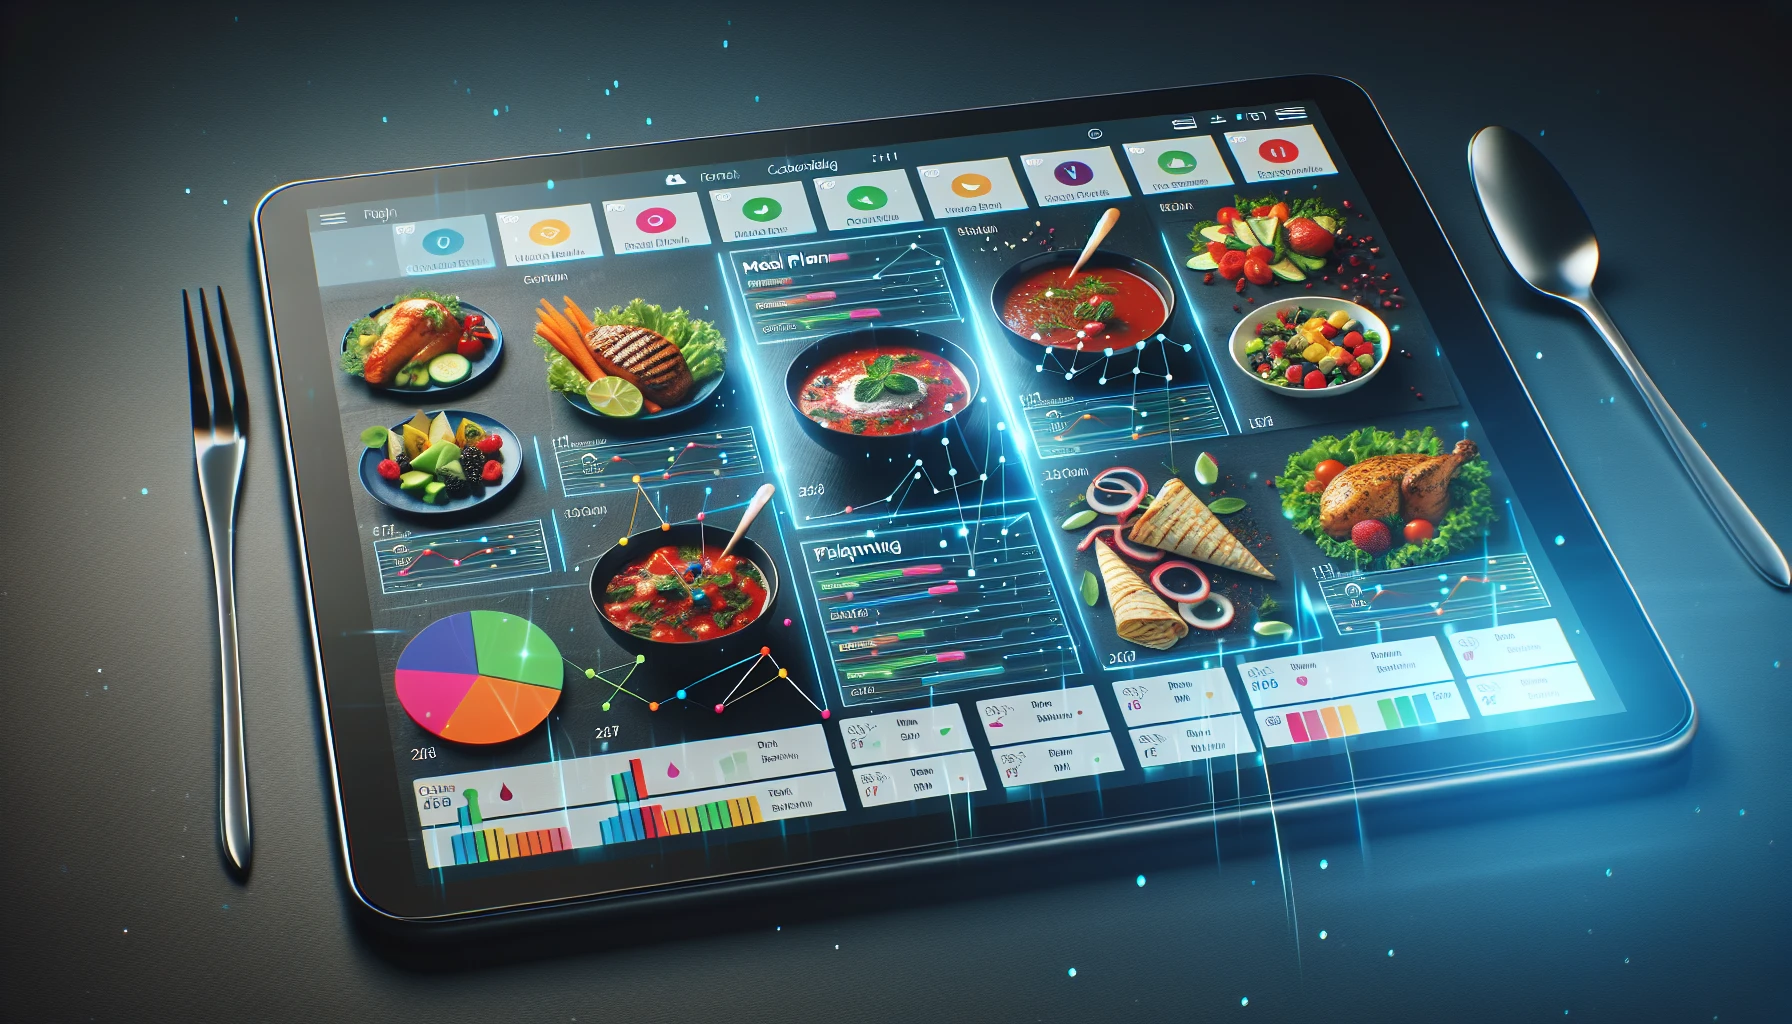 Meal planning software with nutrition analysis feature